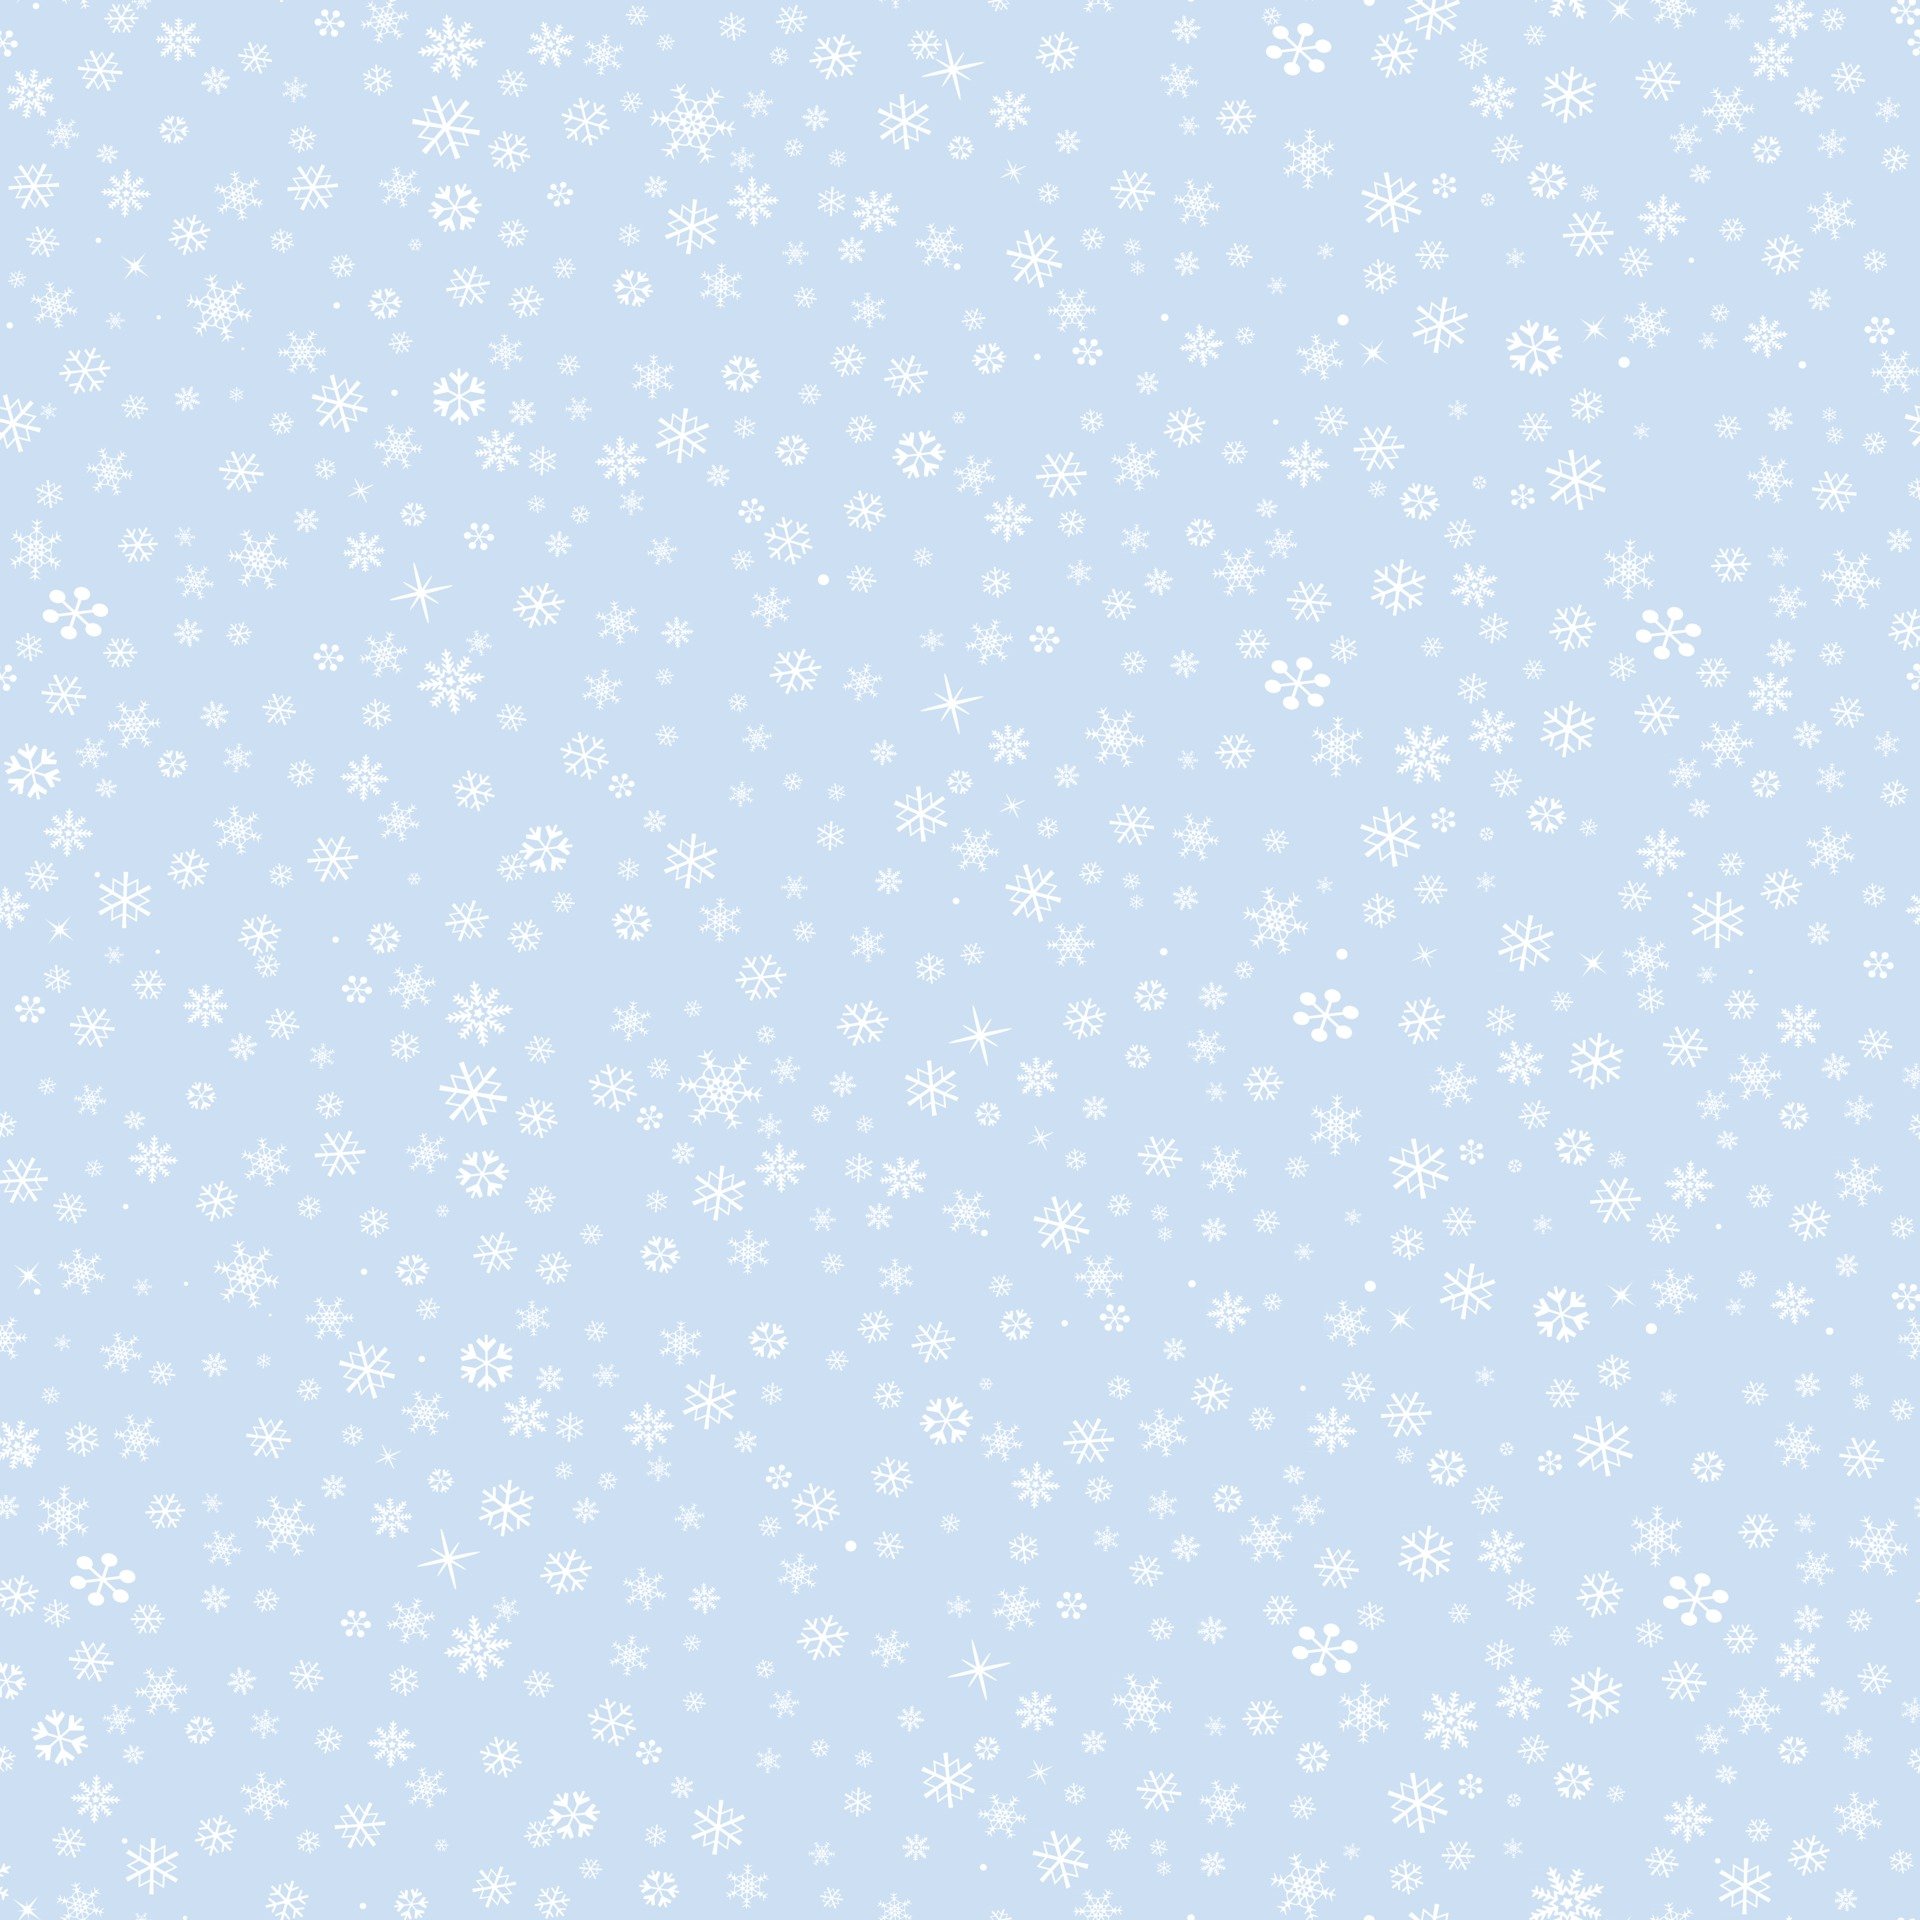 Snow pattern. Christmas seamless background. Winter holiday nature decor. Snowy wallpaper. Ornamental snowflakes